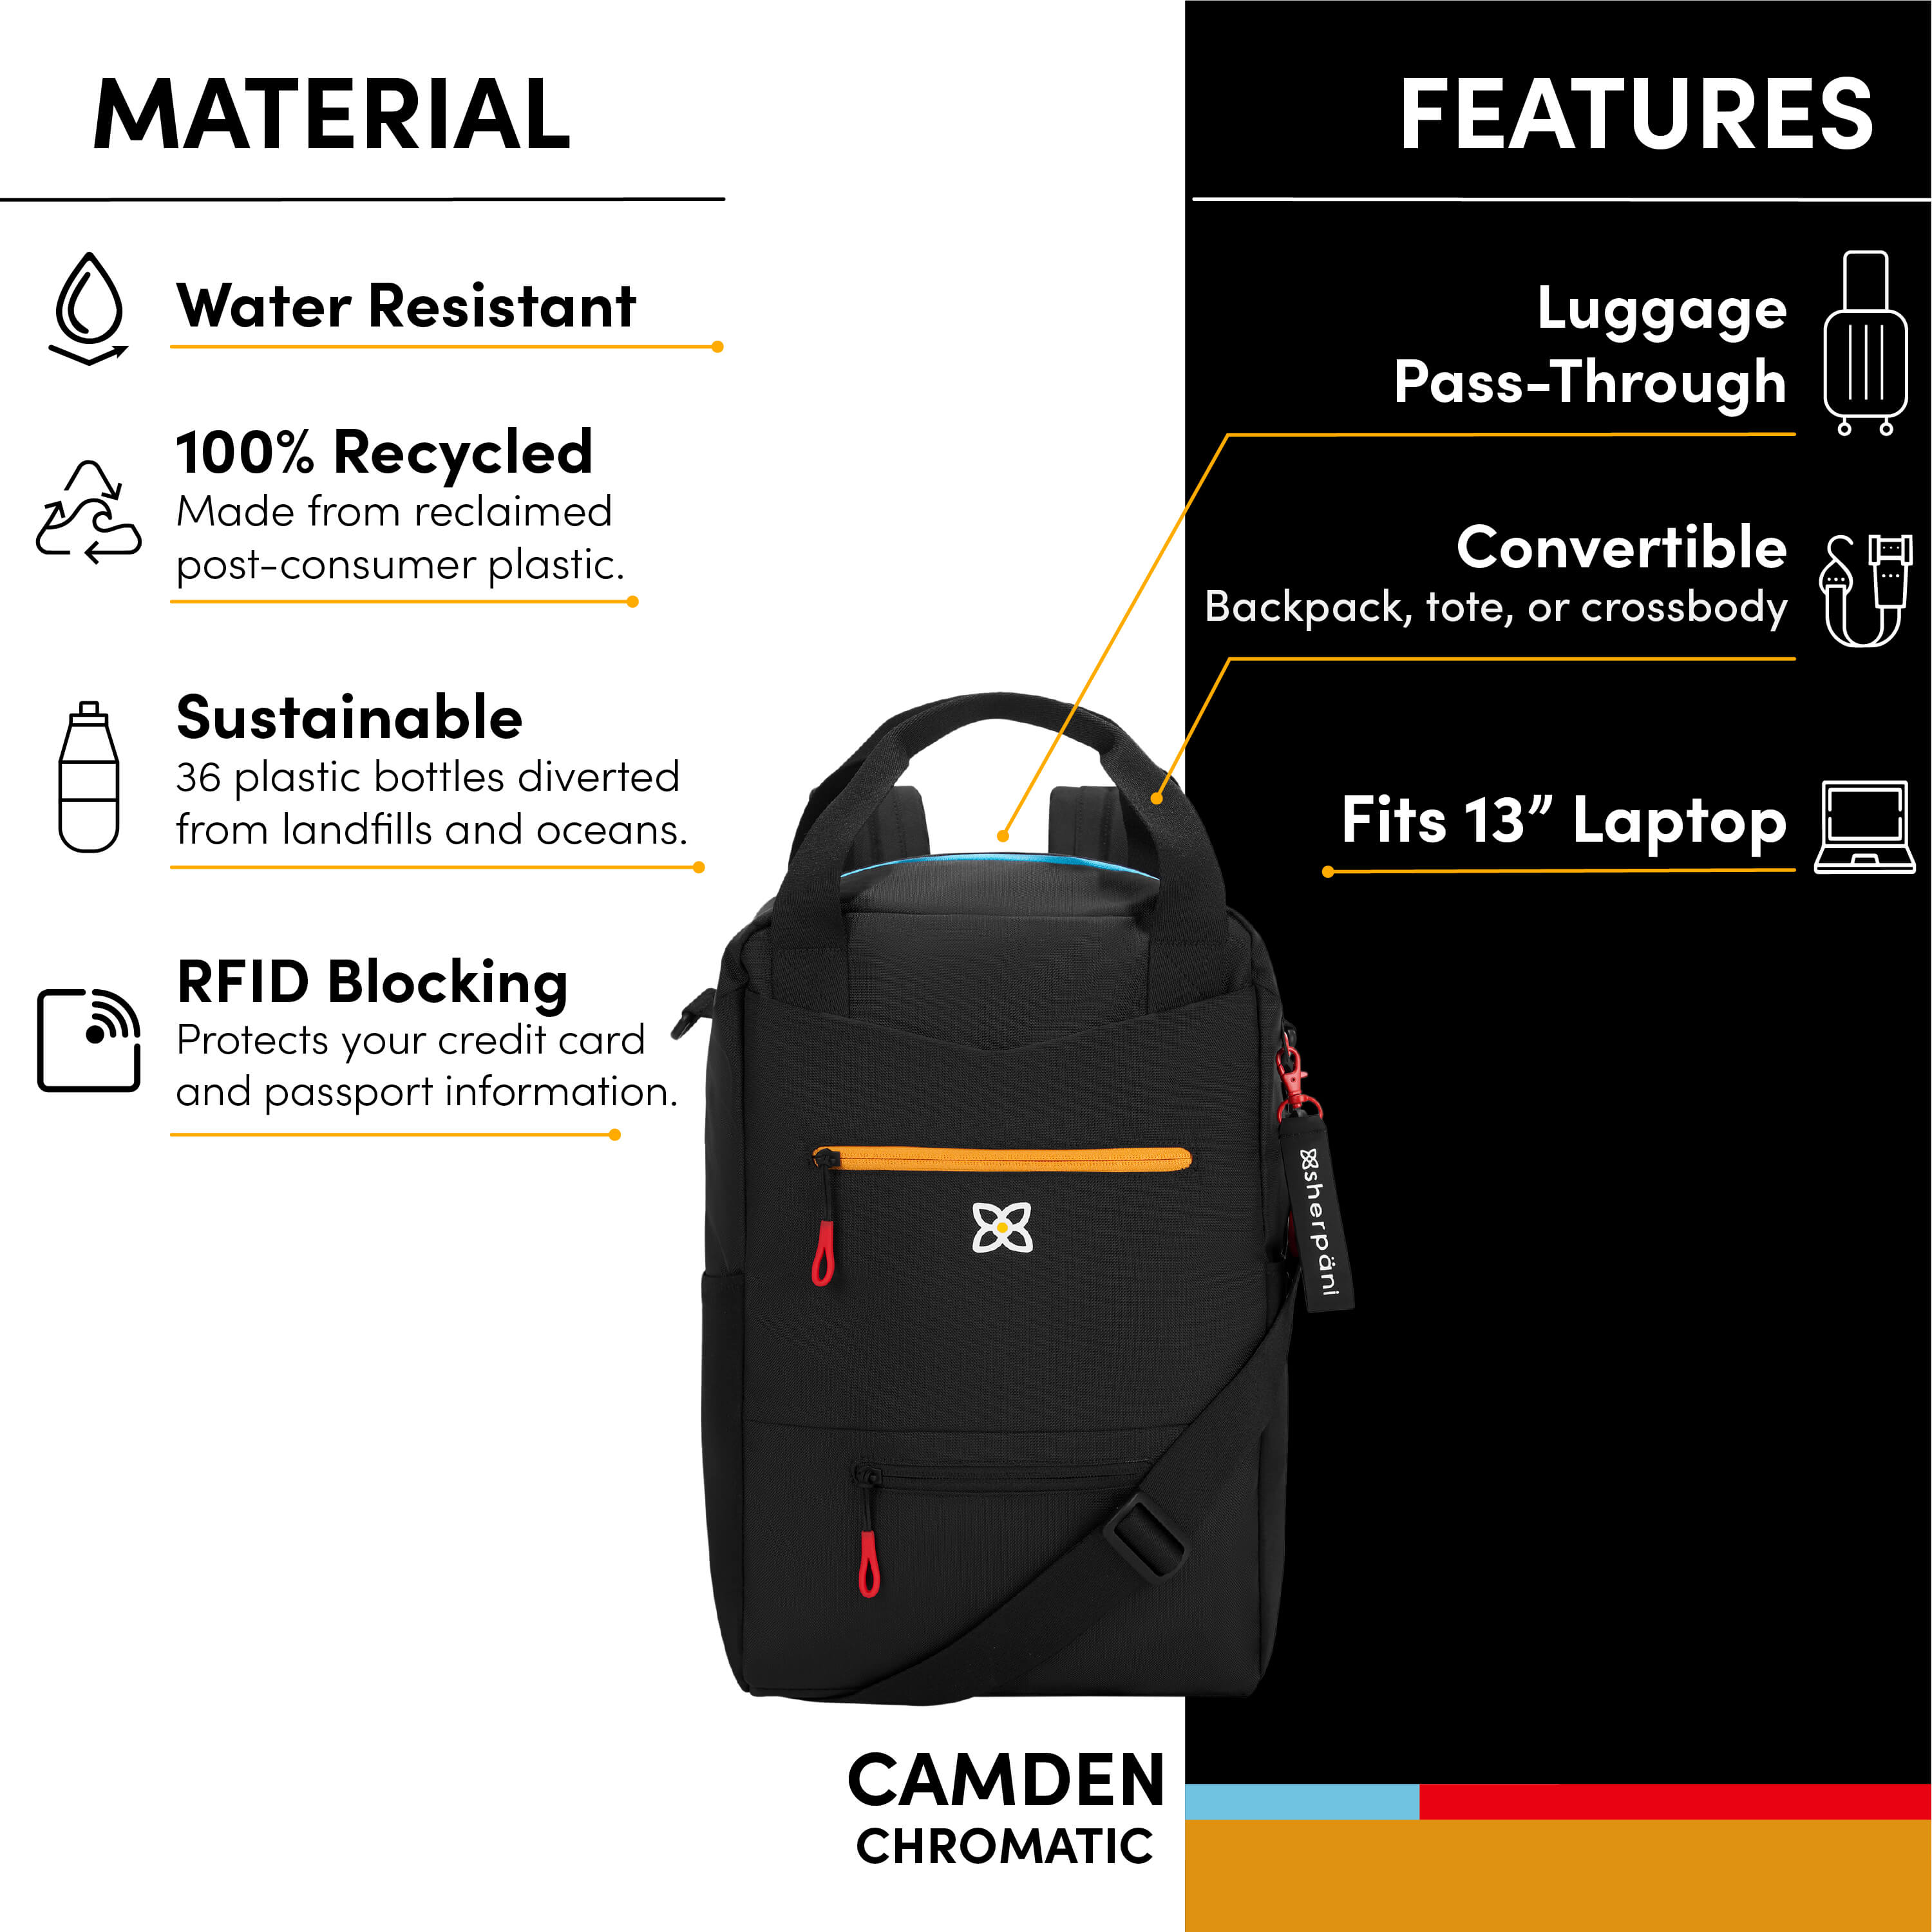 Graphic depicting the following features of Sherpani travel backpack, the Camden: water-resistant material, sustainably made from post consumer plastic, RFID security, three-in-one functionality (backpack, tote, crossbody), luggage pass through, and a 15" compatible laptop sleeve. 